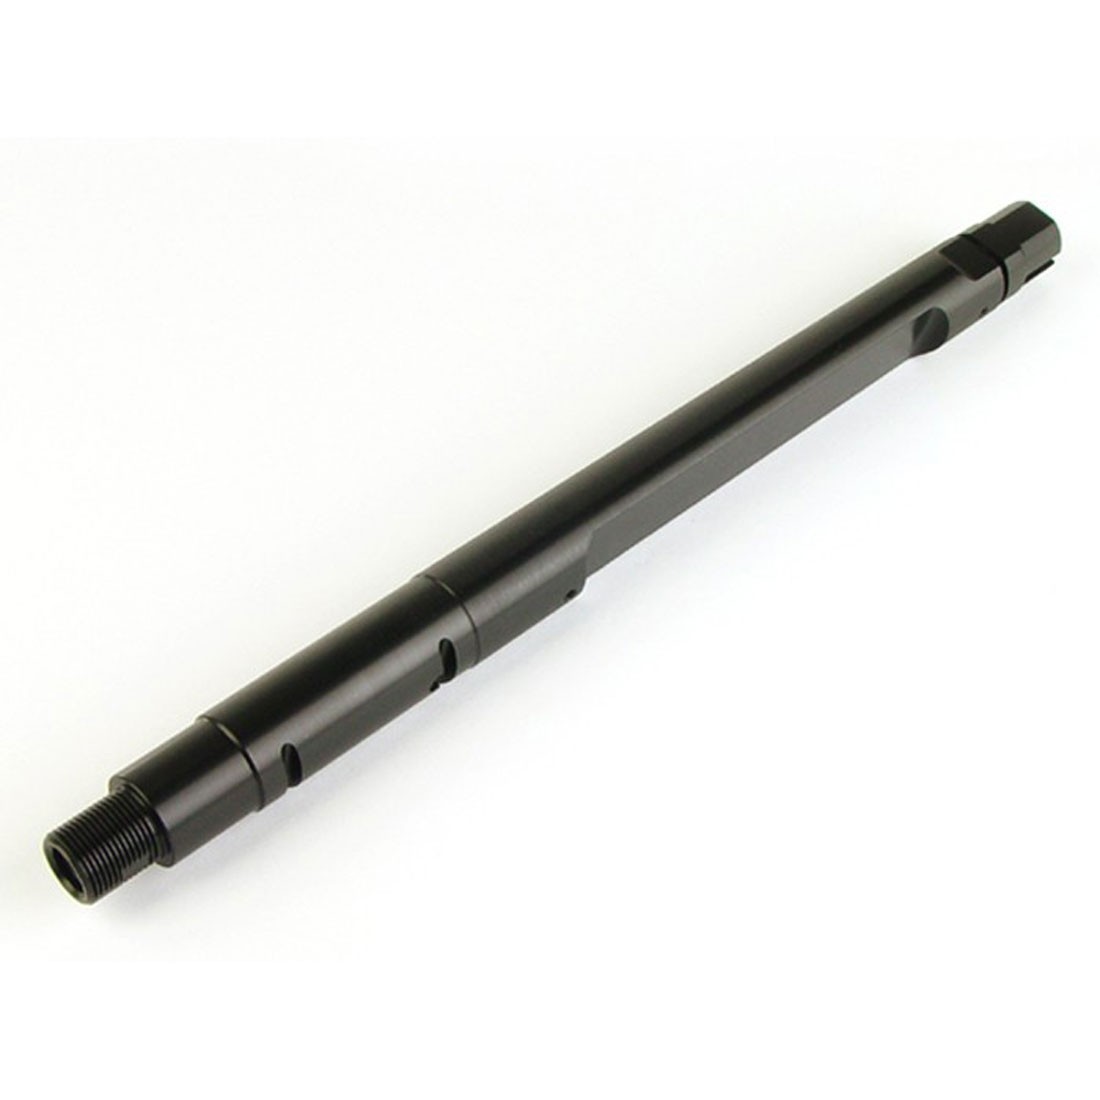 LayLax Short Outer Barrel for Marui M4 S-System